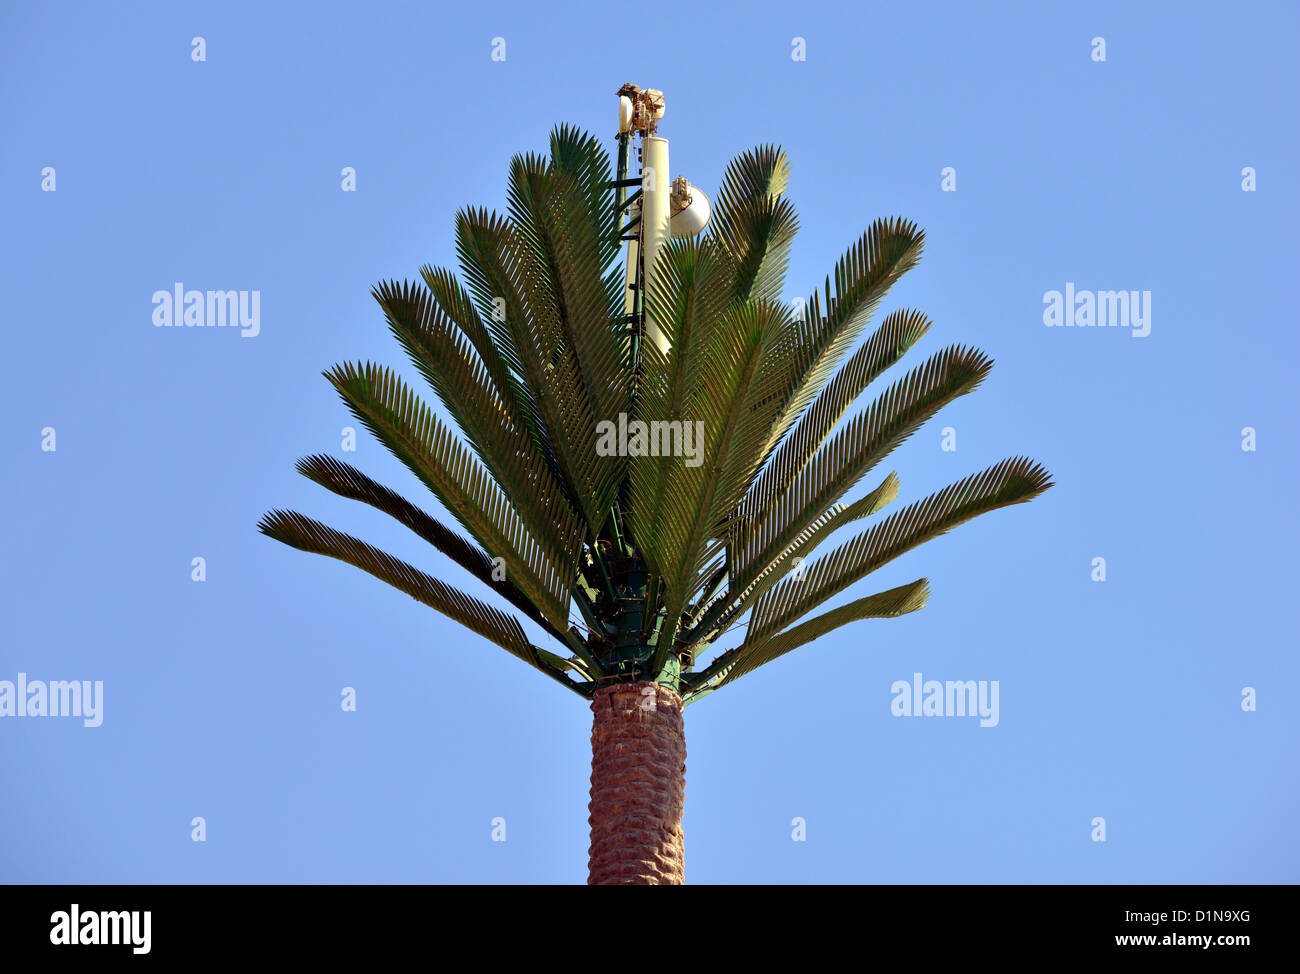 Mobile phone mast disguised as a Palm tree, mobile phone mast, Egypt Stock Photo